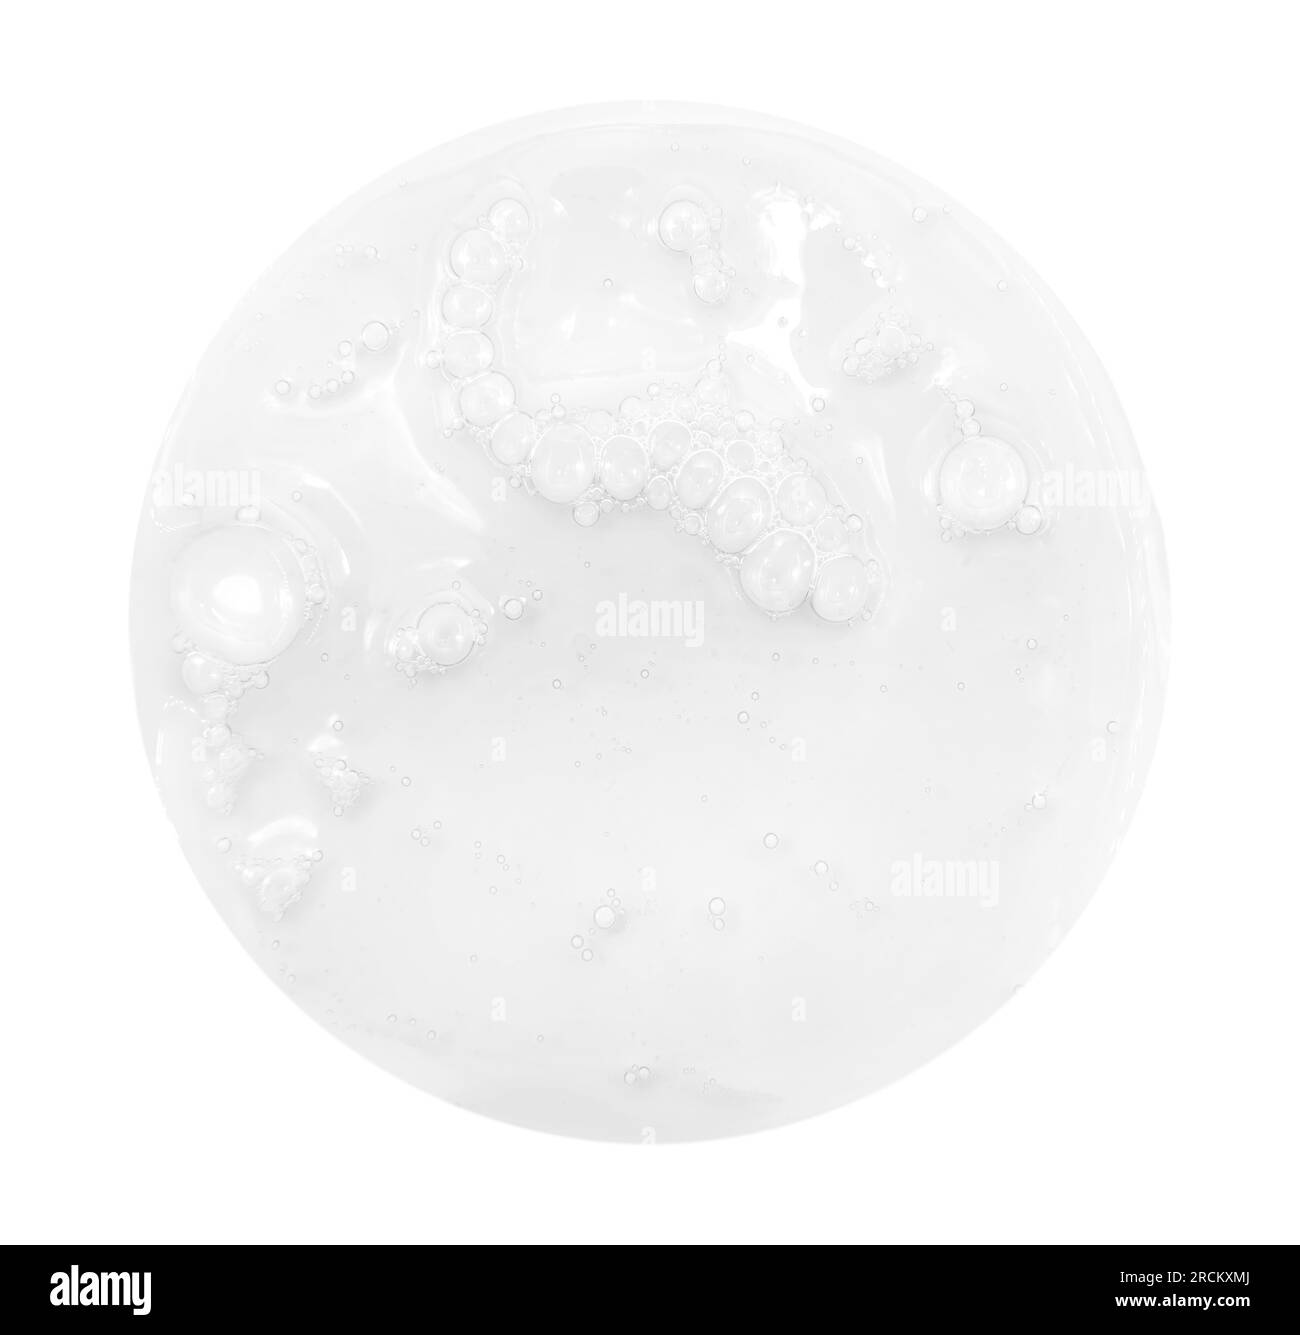 Soap foam round shape on a white background. Shampoo or detergent drop isolate Stock Photo